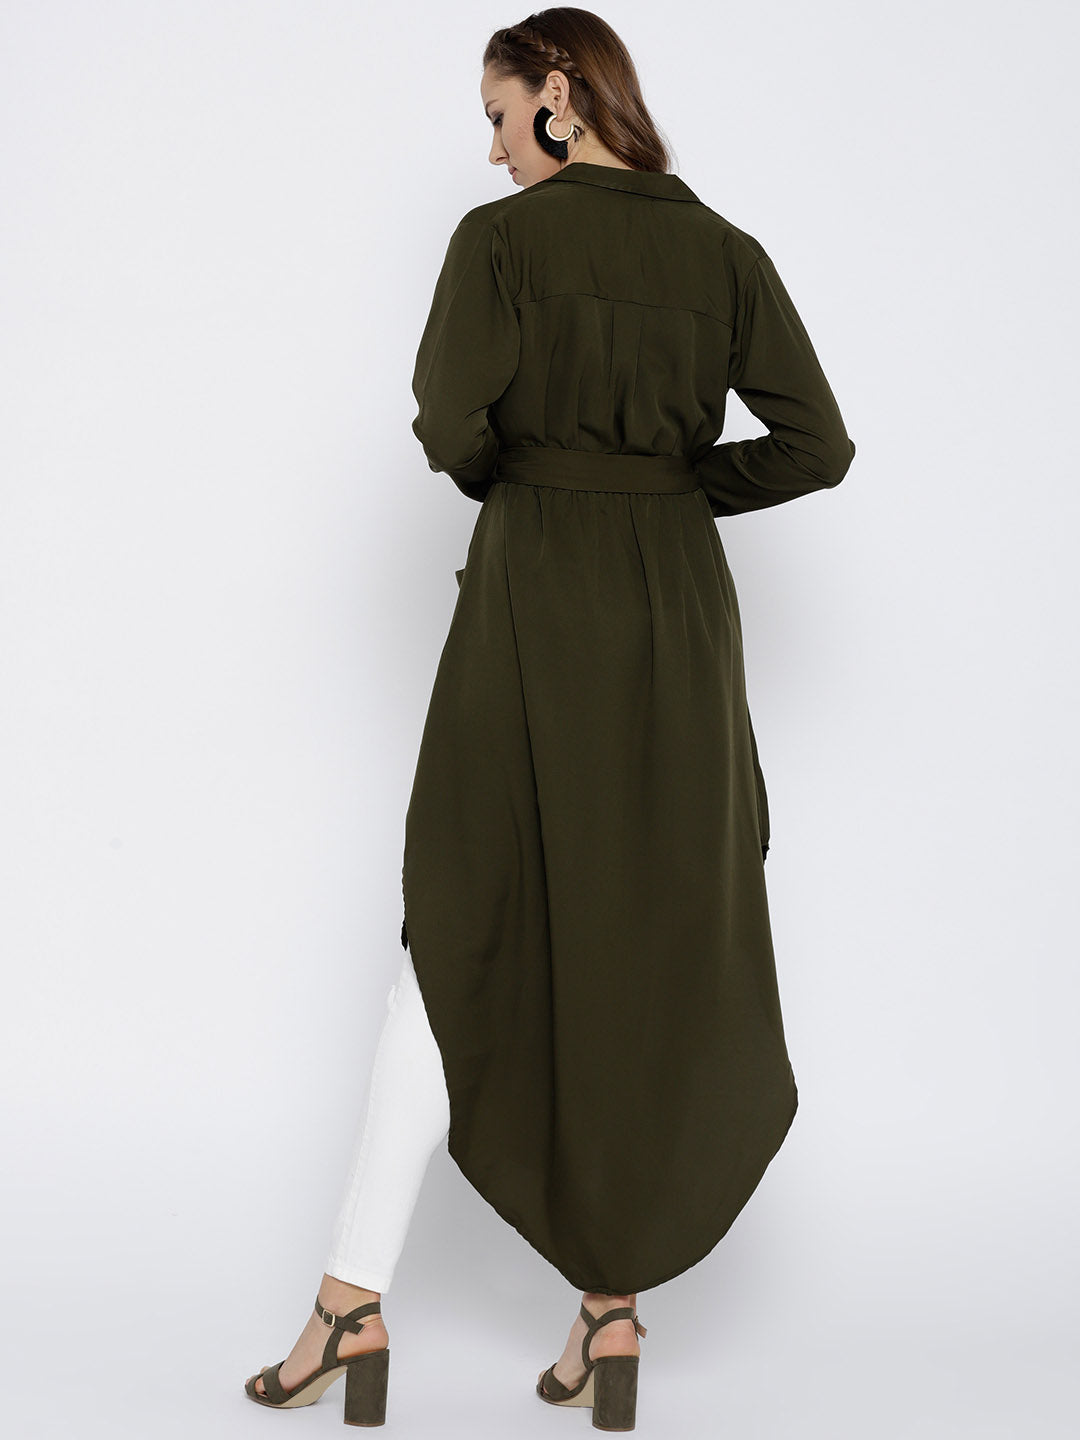 Olive Green Solid Maxi Top - Berrylush